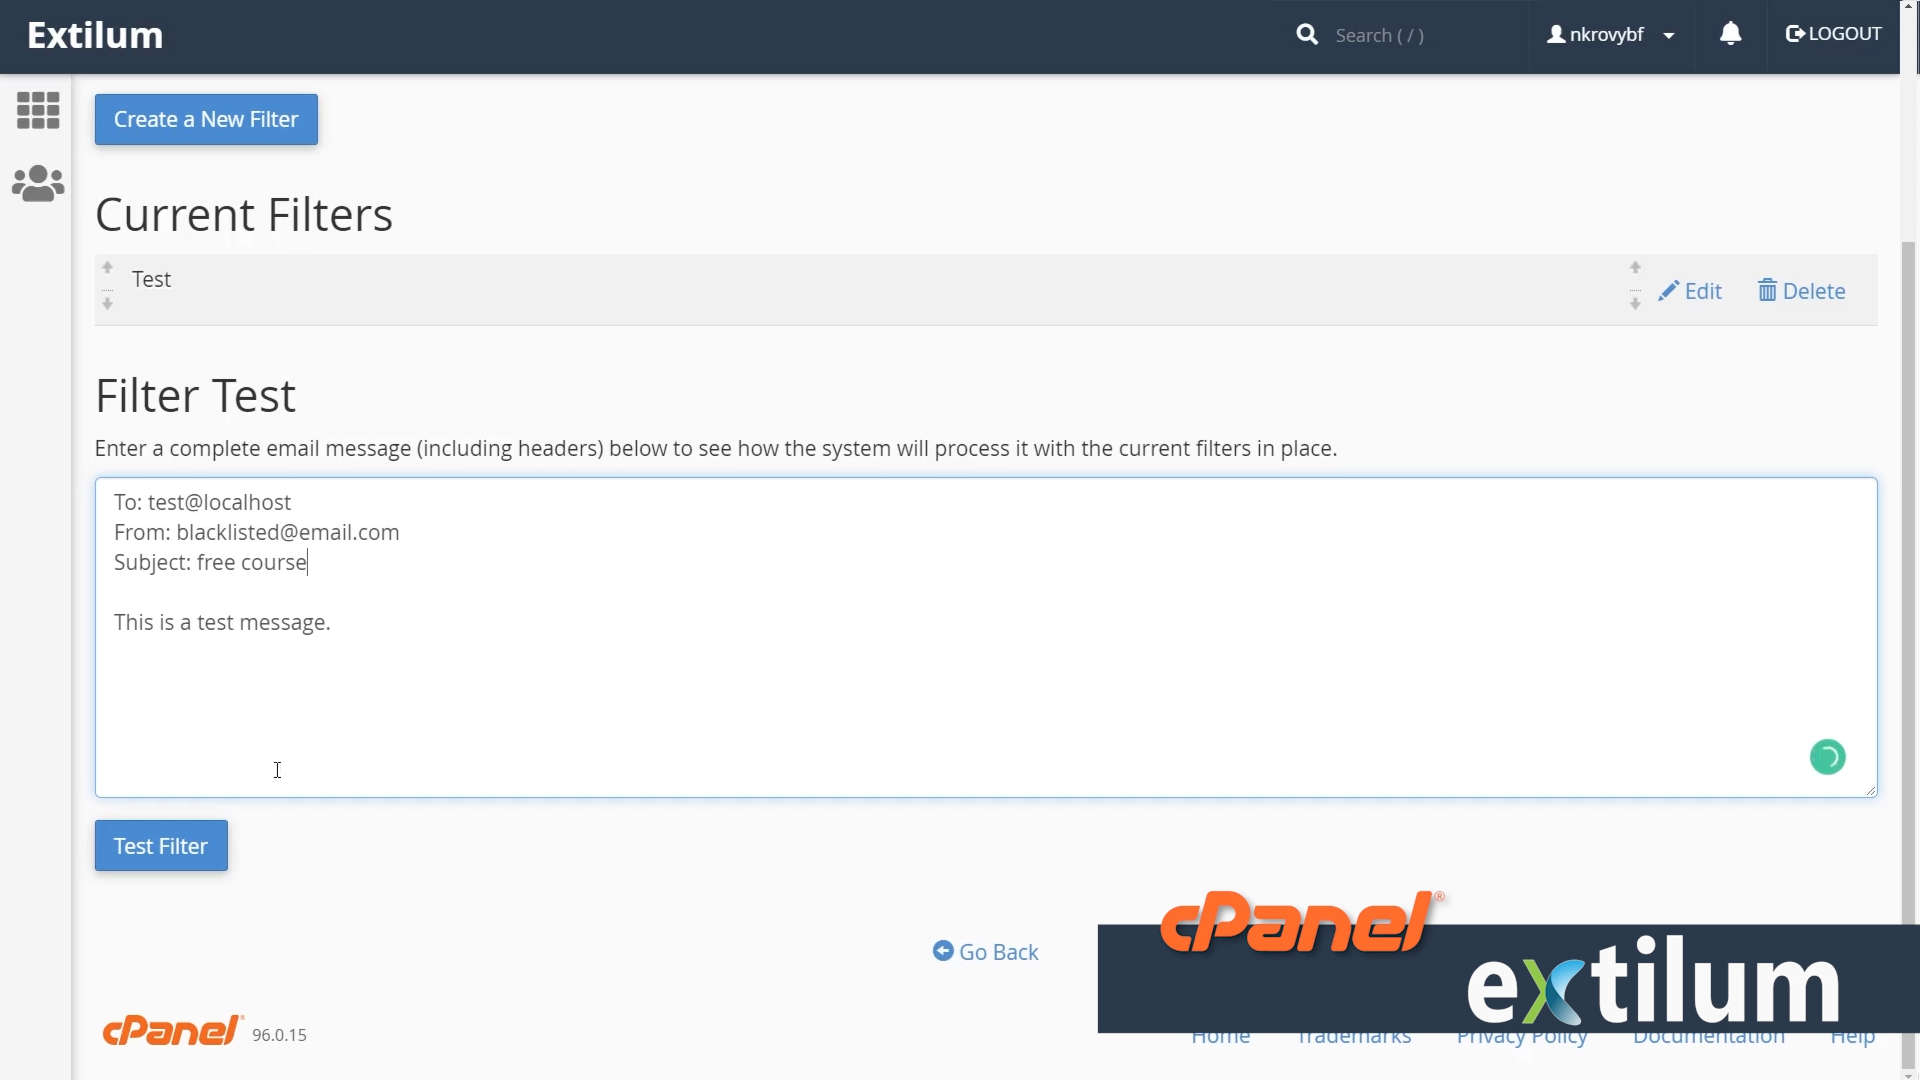 Extilum cPanel - Global Email filters